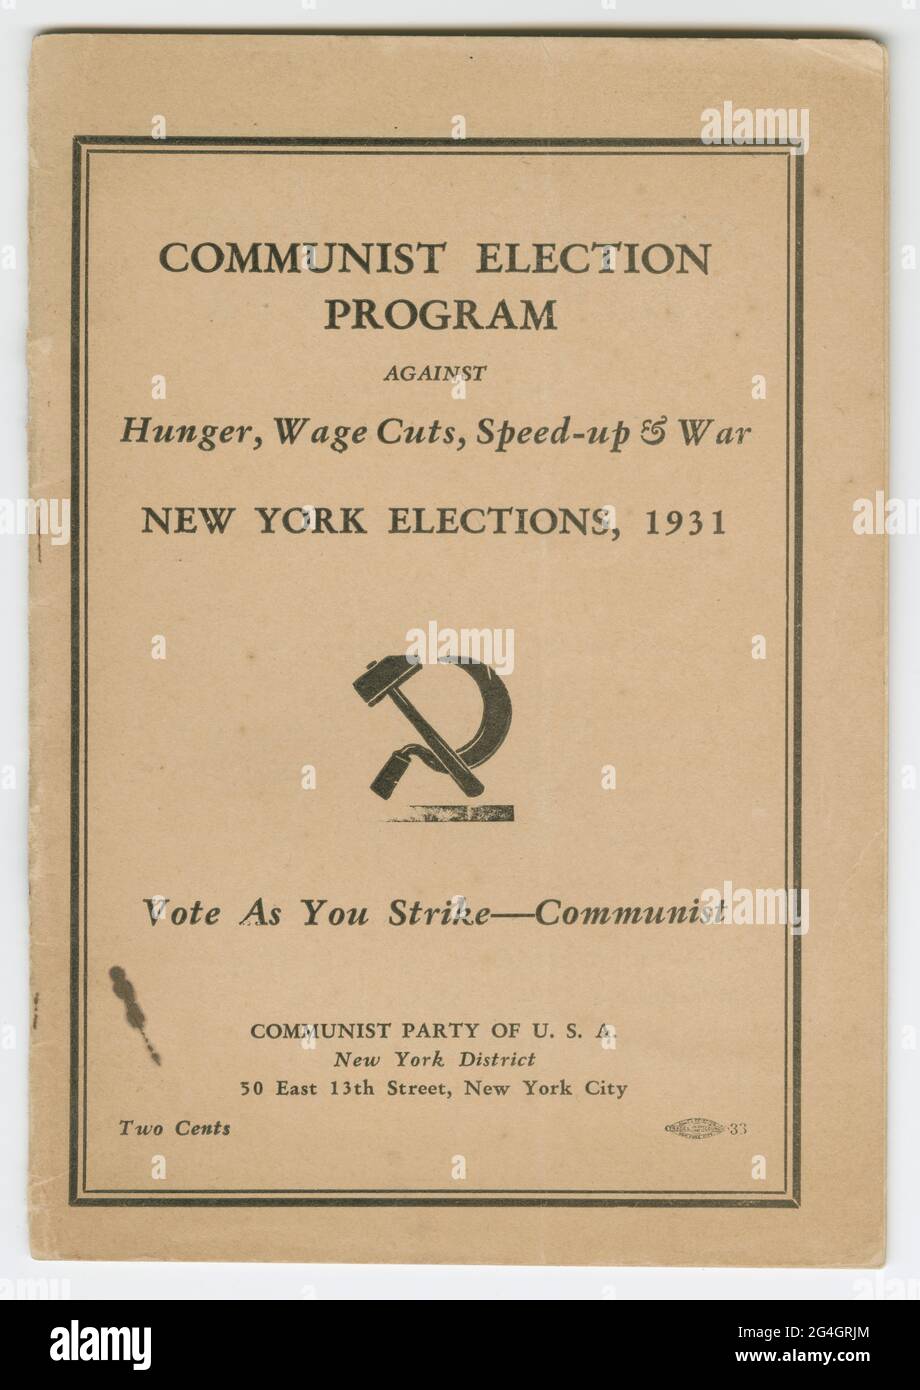 A pamphlet produced by the Communist Party of the United States of America. The front cover contains black print on yellowed paper. At center, a hammer and sickle. The interior consists of twenty-five pages about the Communist Election Program. The back of the pamphlet is blank. Stock Photo